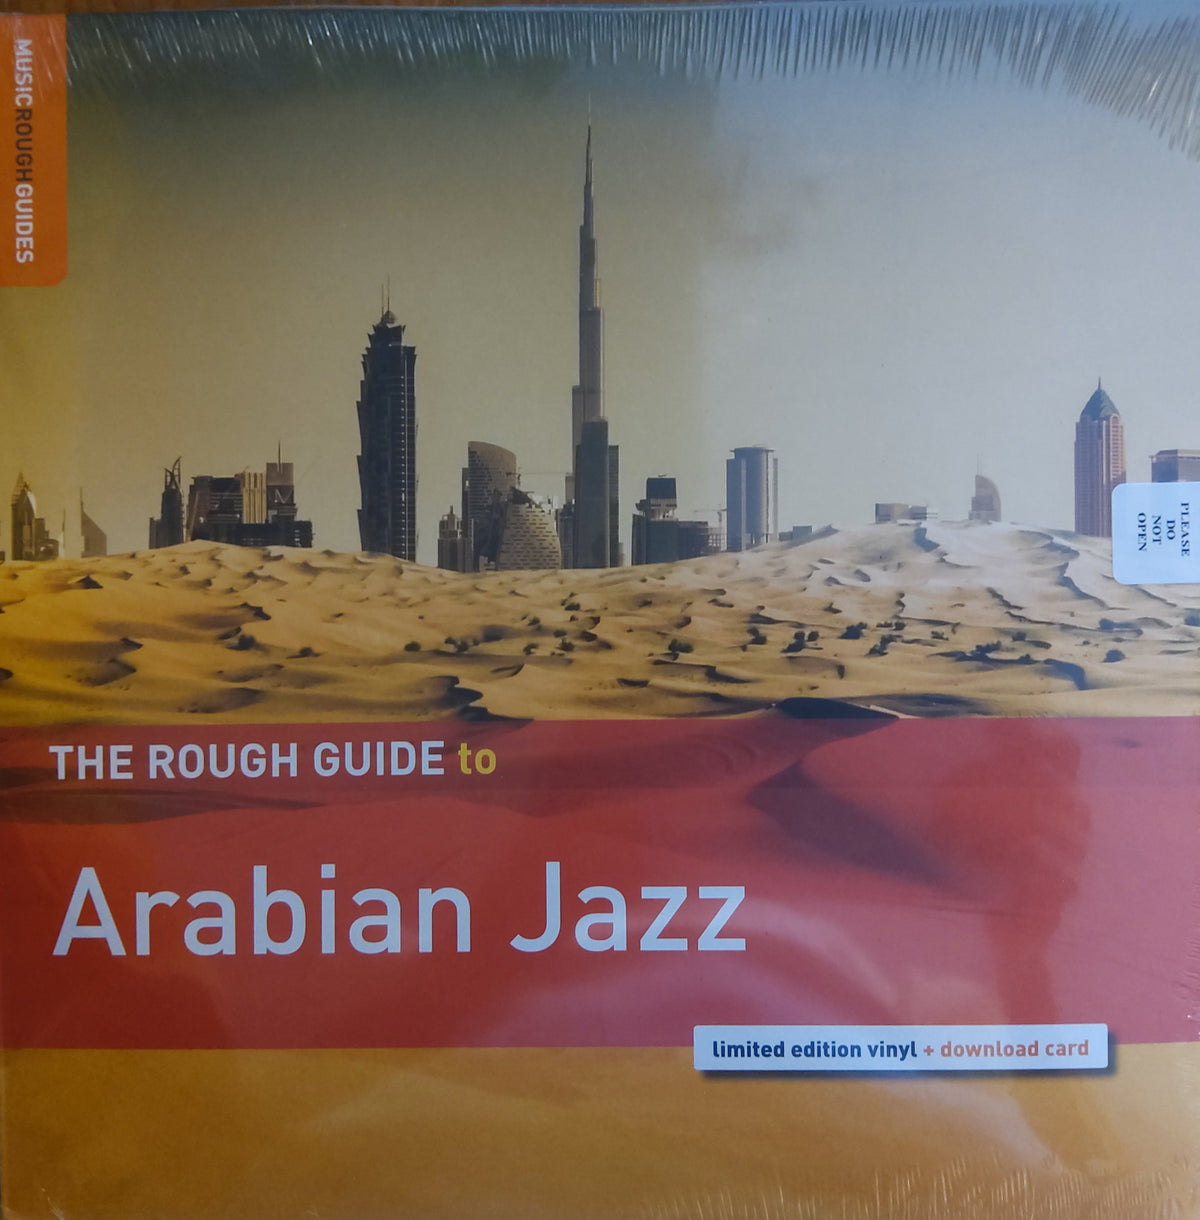 A Rough Guide to Arabian Jazz | New Sealed | Record Vinyl